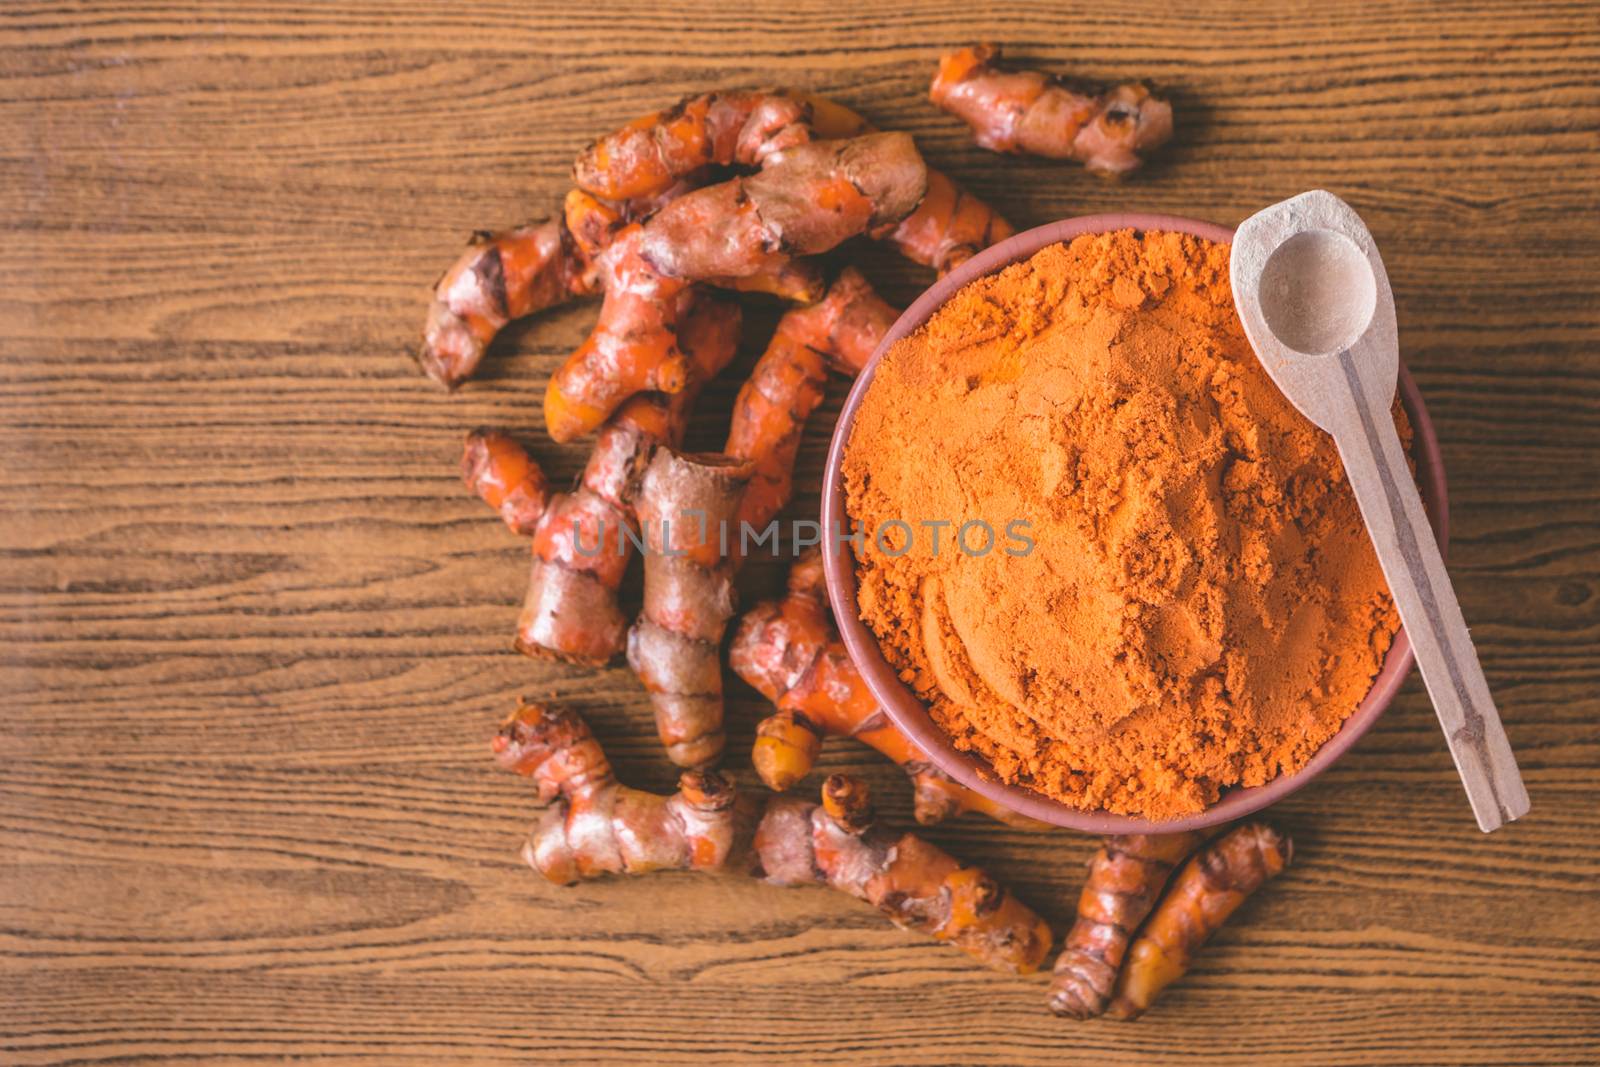 Turmeric roots with turmeric powder on wooden background.